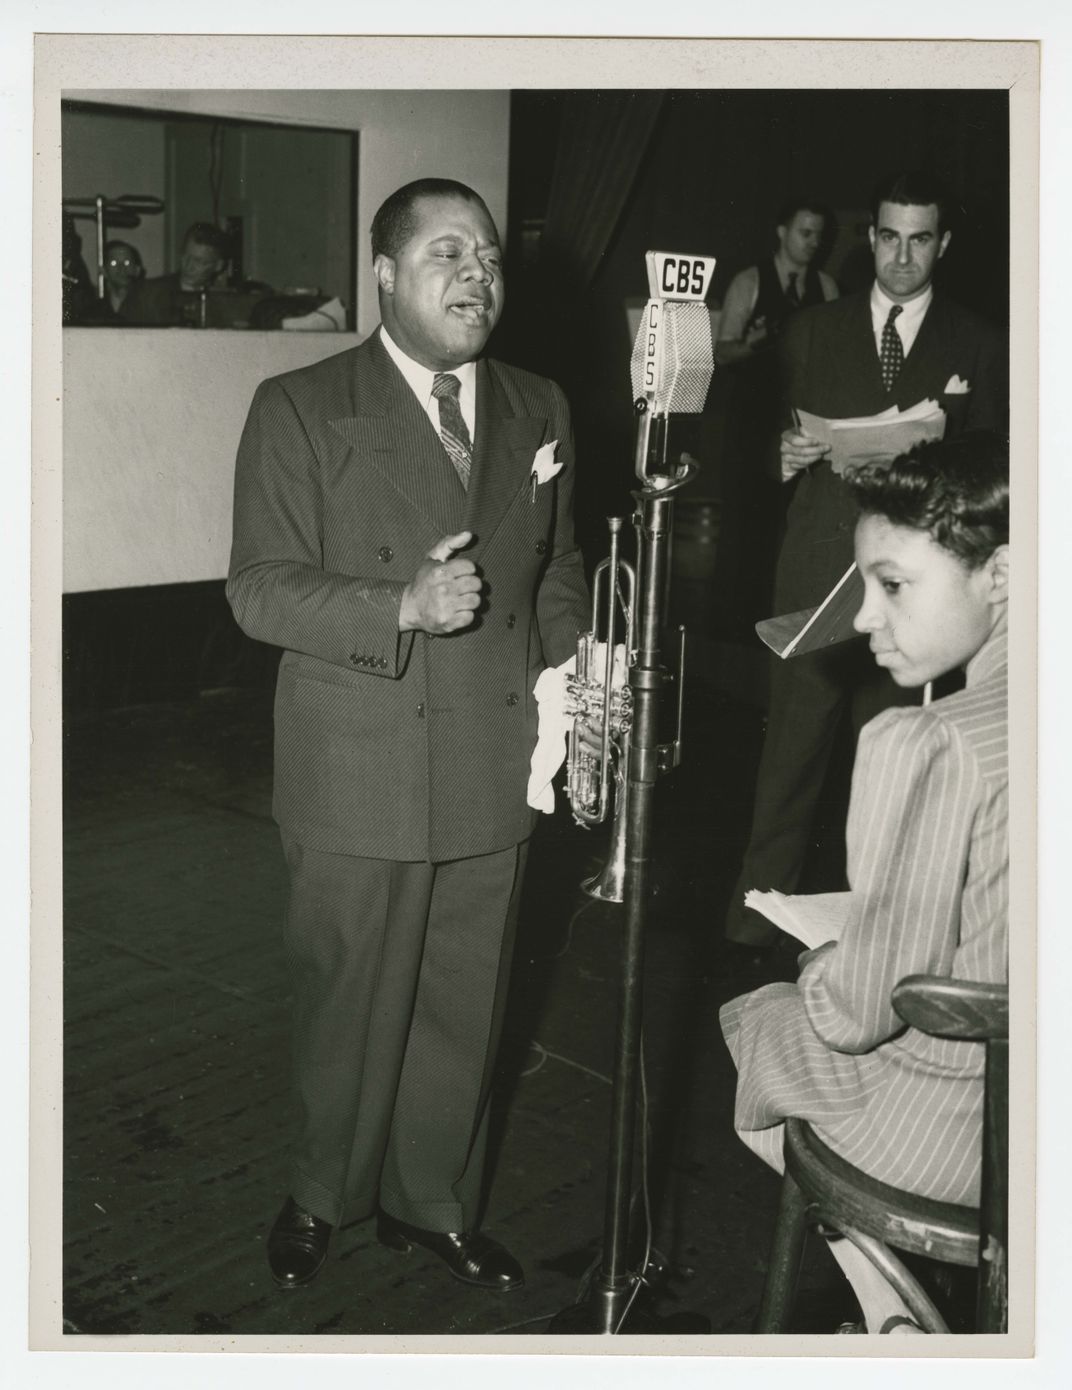 Photograph of Louis Armstrong recording at the CBS Studio in New York